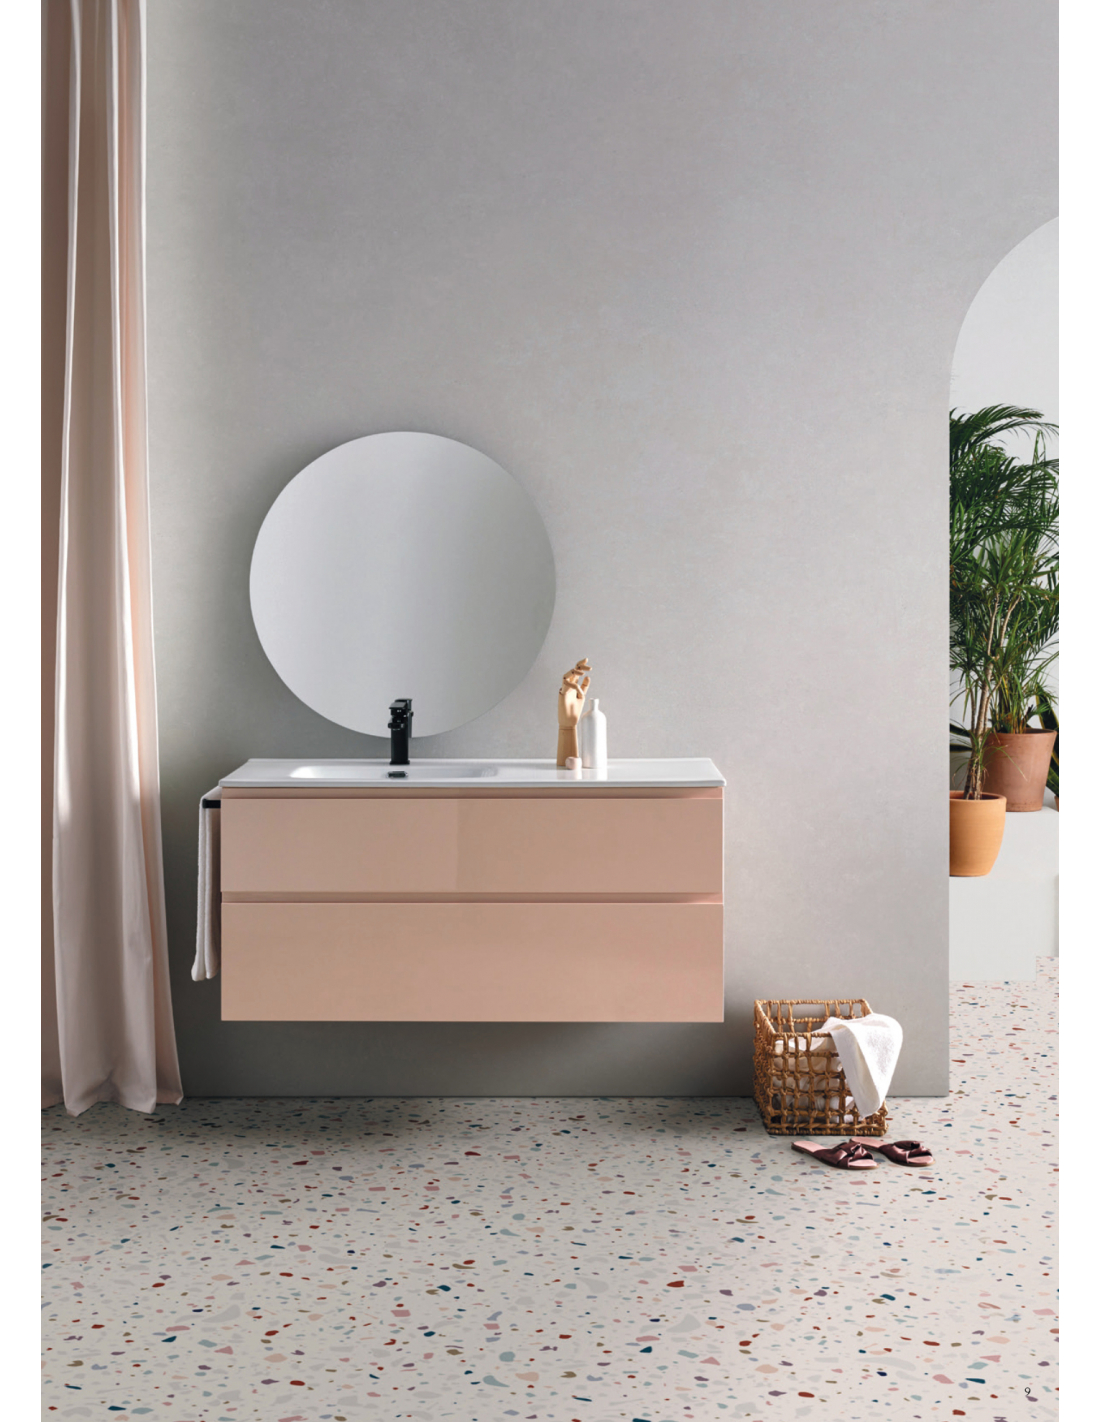 Toallero Lateral Mueble SPA